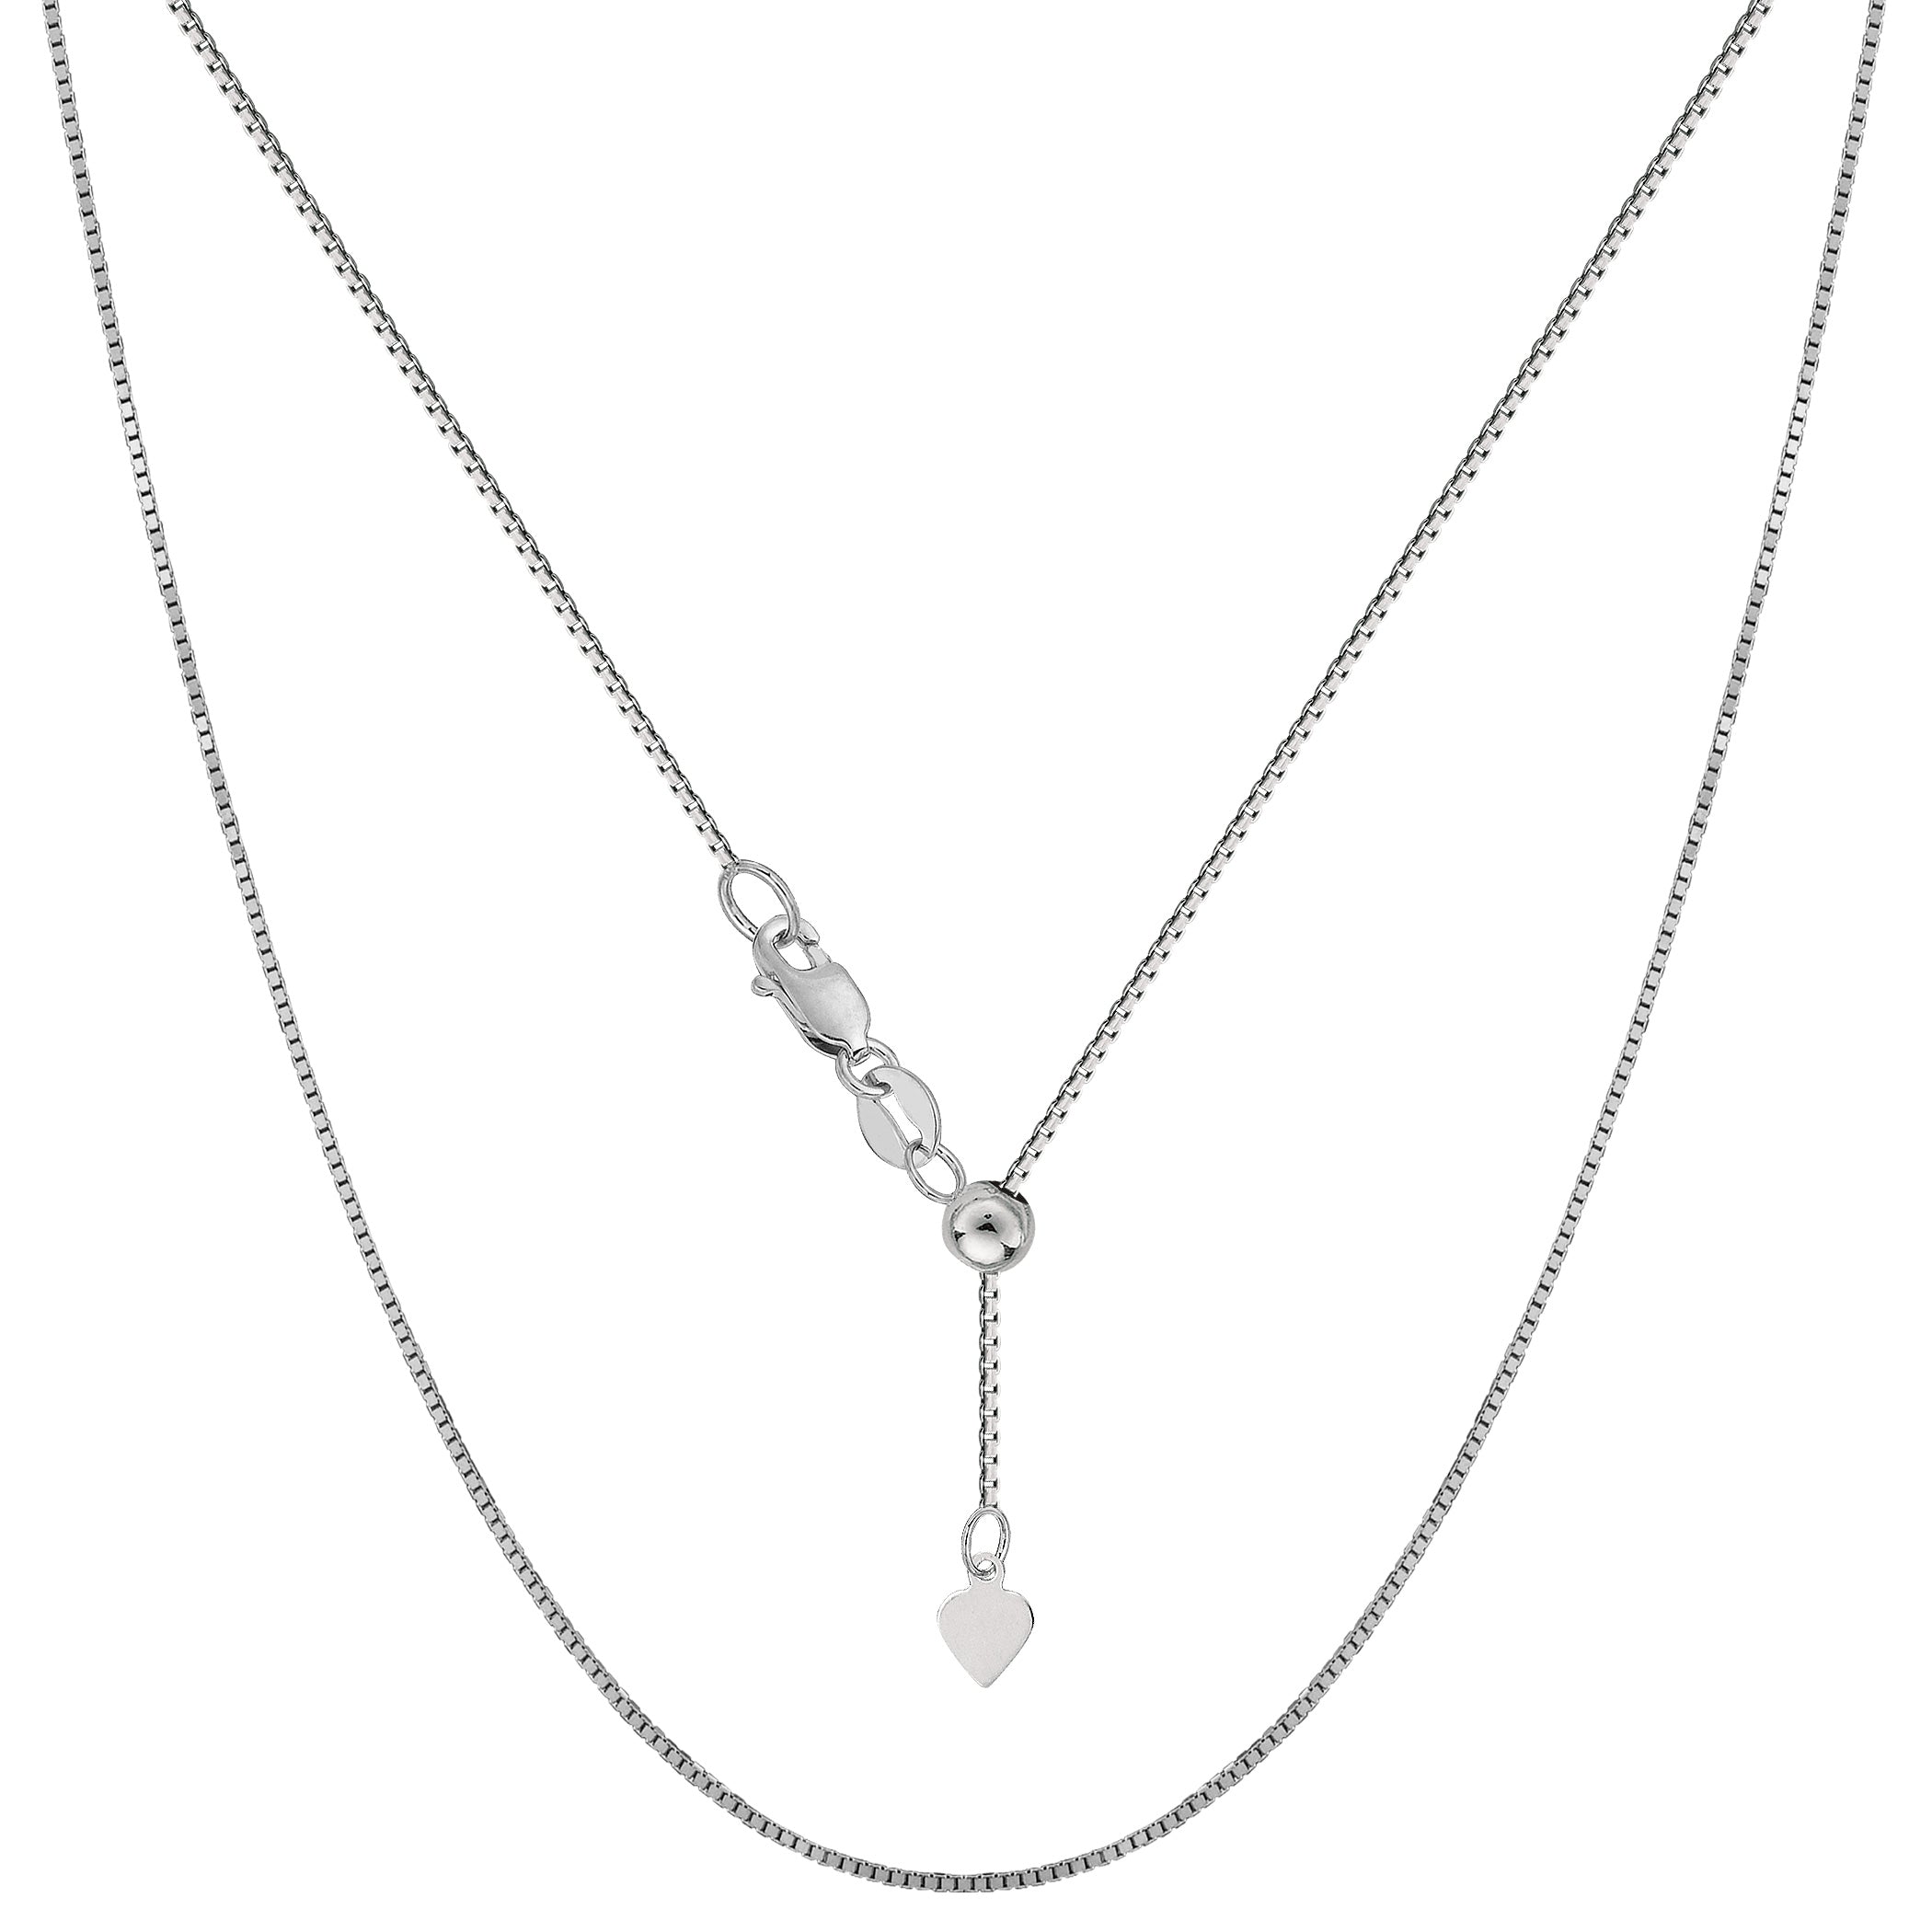 10k White Gold Adjustable Box Link Chain Necklace, 0.7mm, 22" fine designer jewelry for men and women